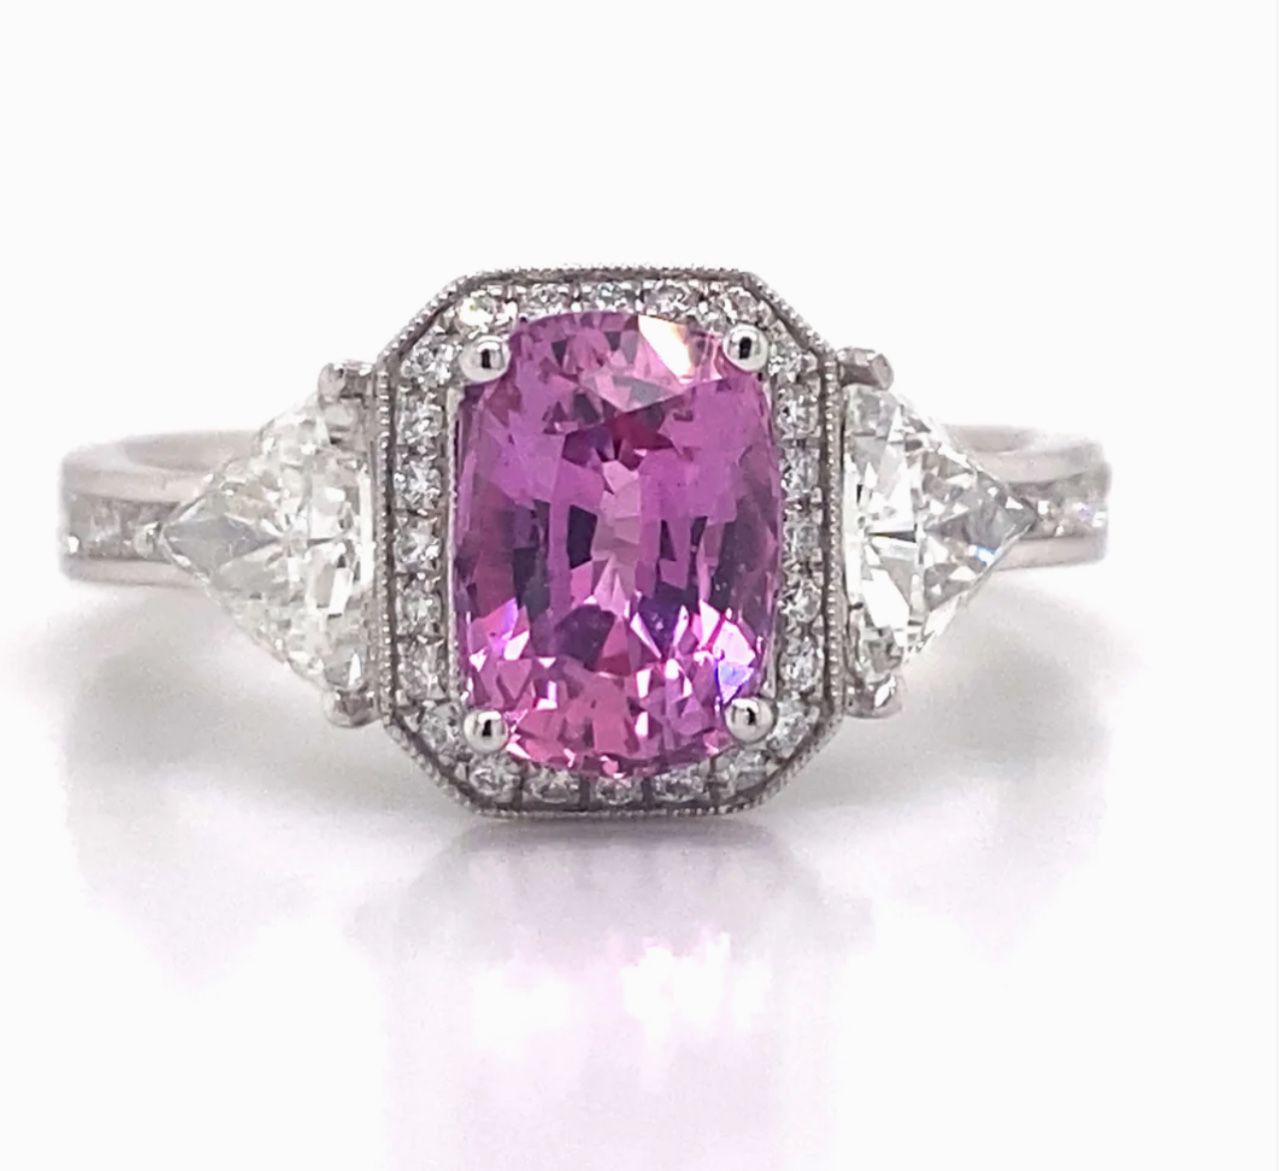 Pink Sapphire & Diamond Ring in 18K White Gold 💎🥰 A beautiful 1.57 carat cushion cut pink sapphire sits at the center of this enchanting Simon G. se